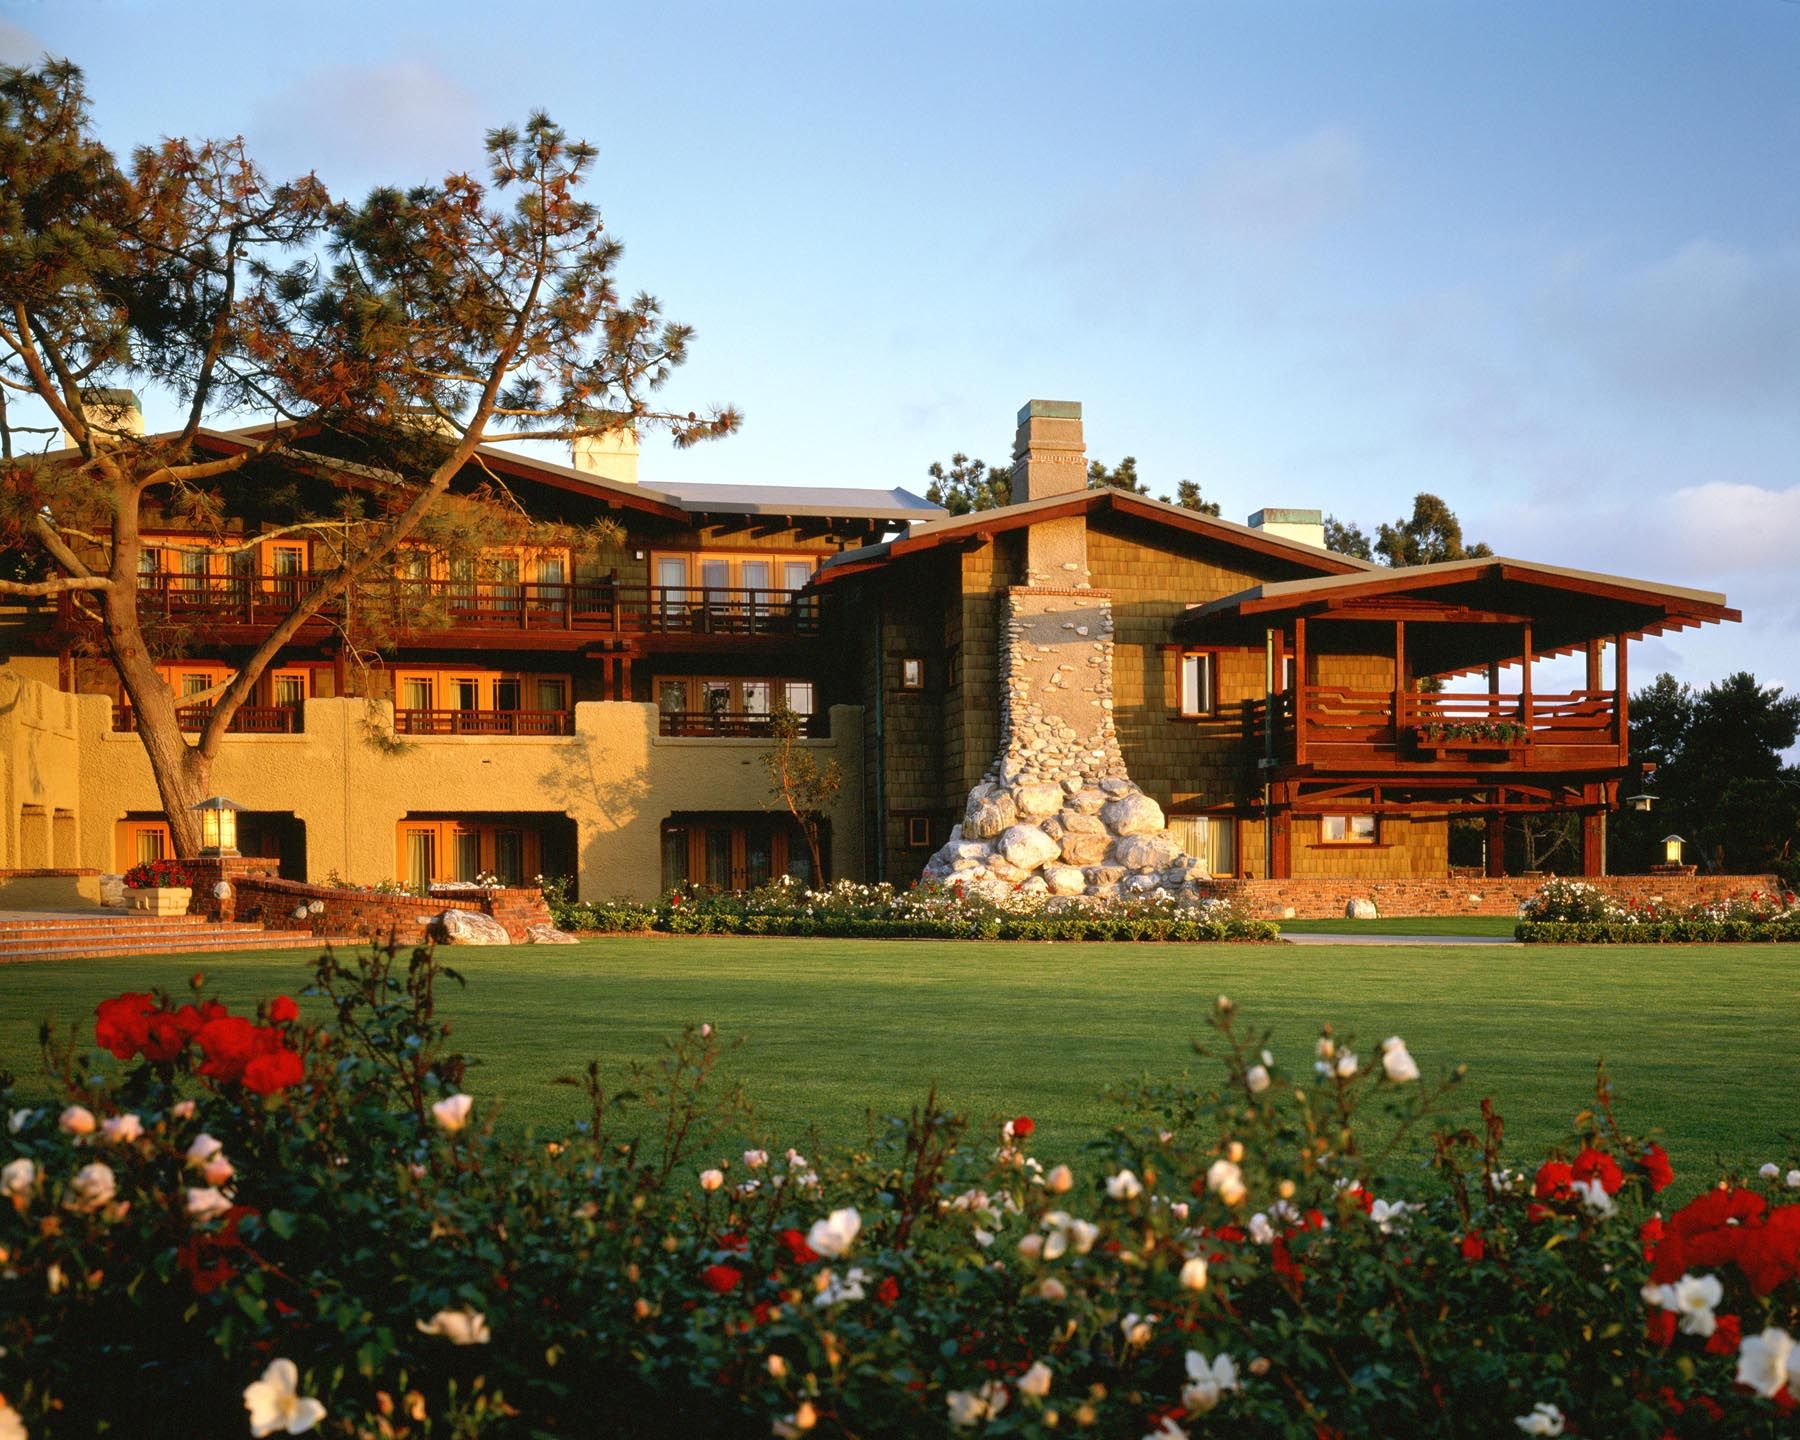 The Lodge at Torrey Pines flowers